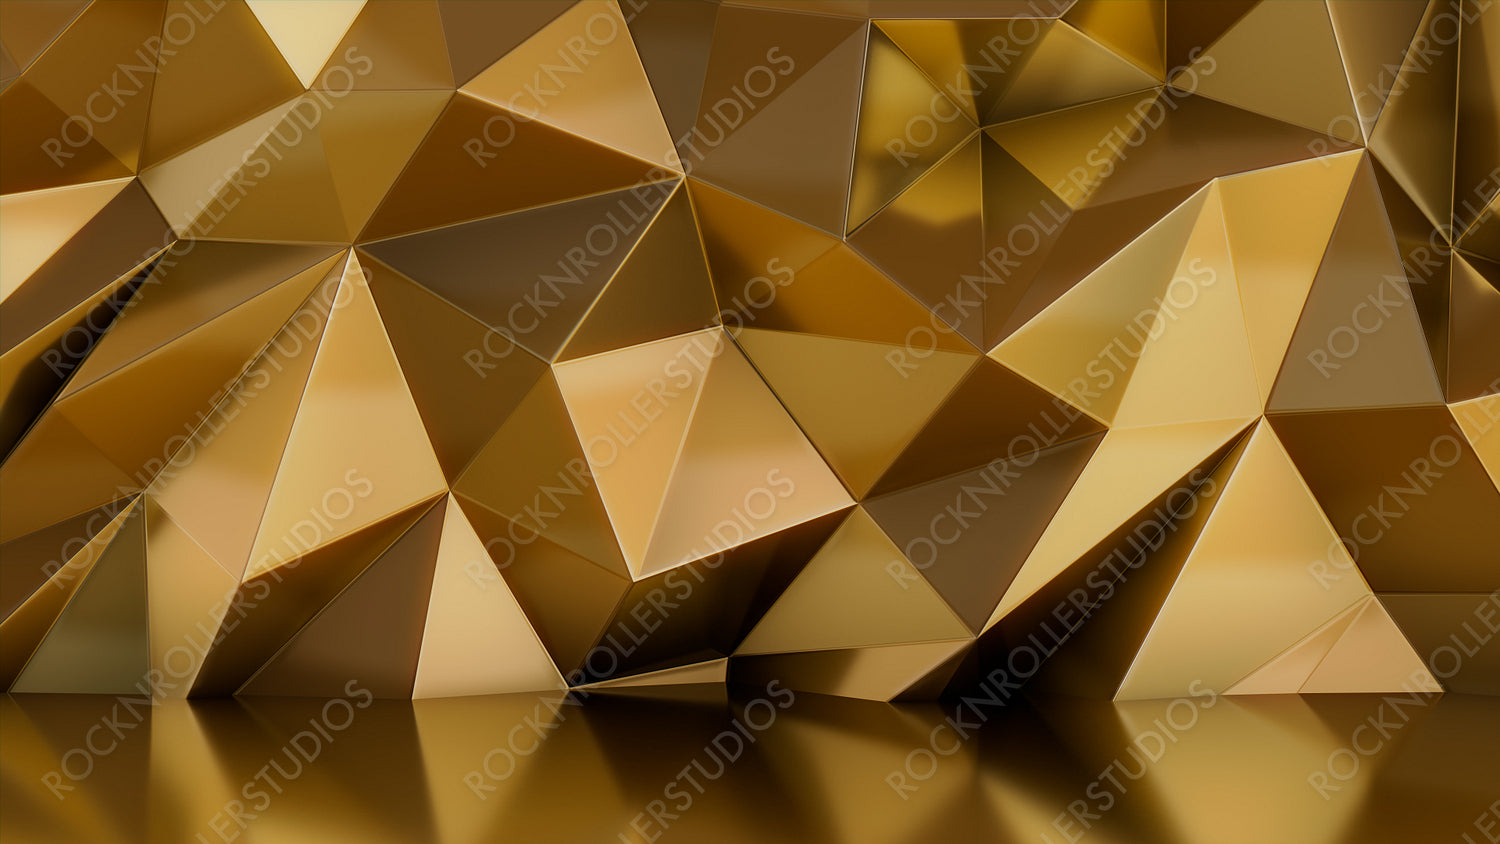 Gold 3D Angular Shaped Wall. Futuristic Architectural Background.